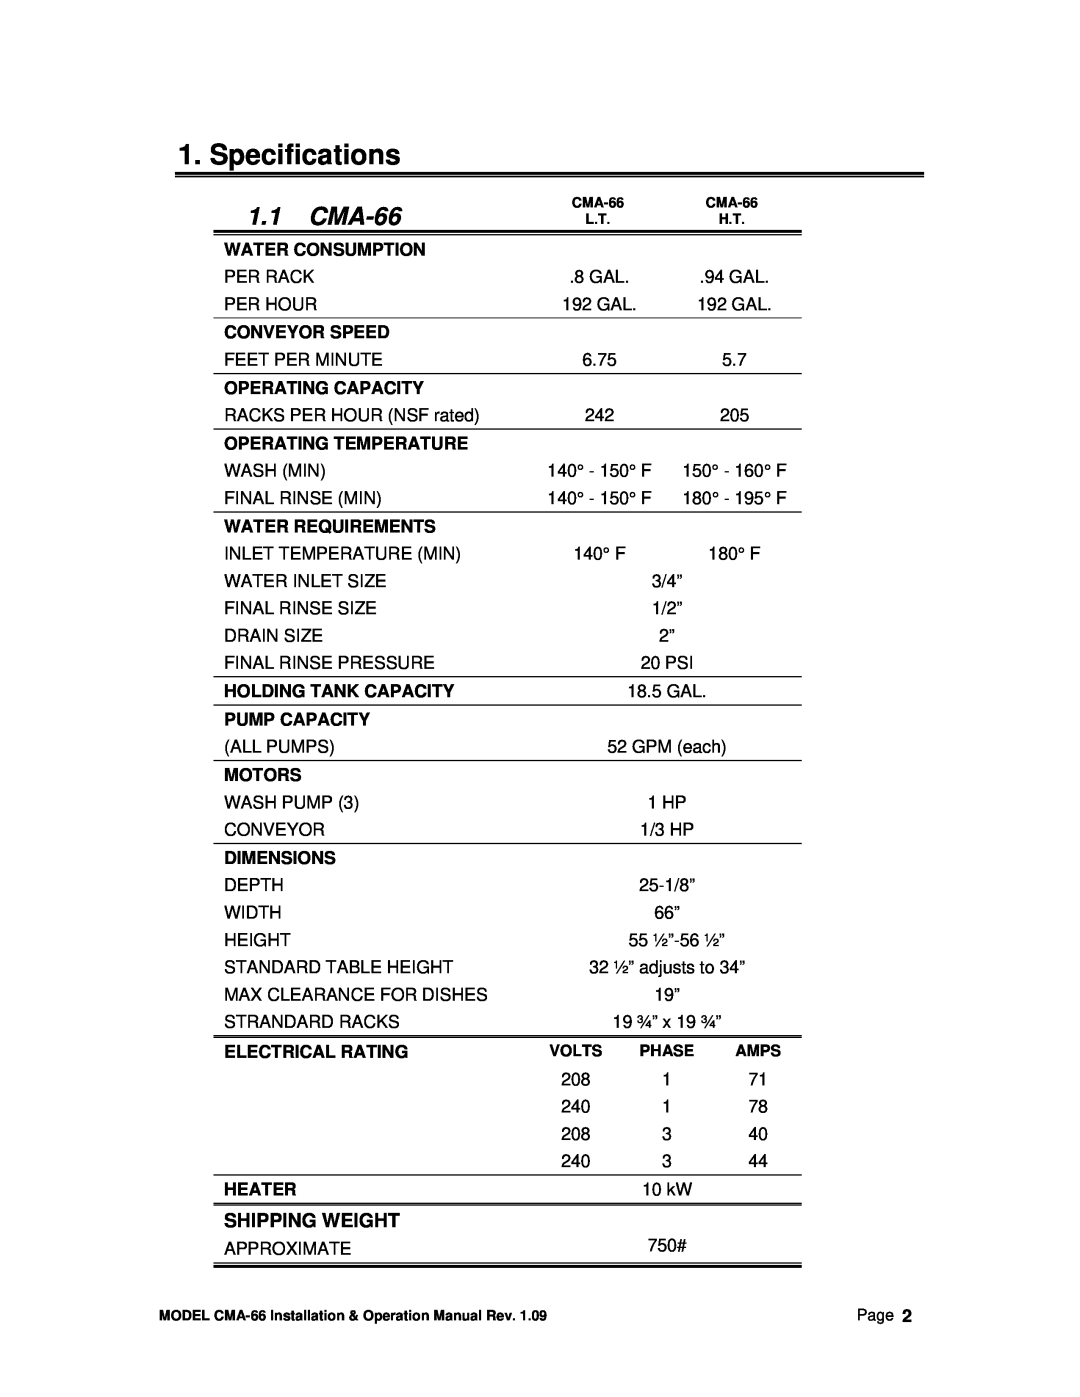 CMA Dishmachines CMA-66 manual Specifications, Shipping Weight 